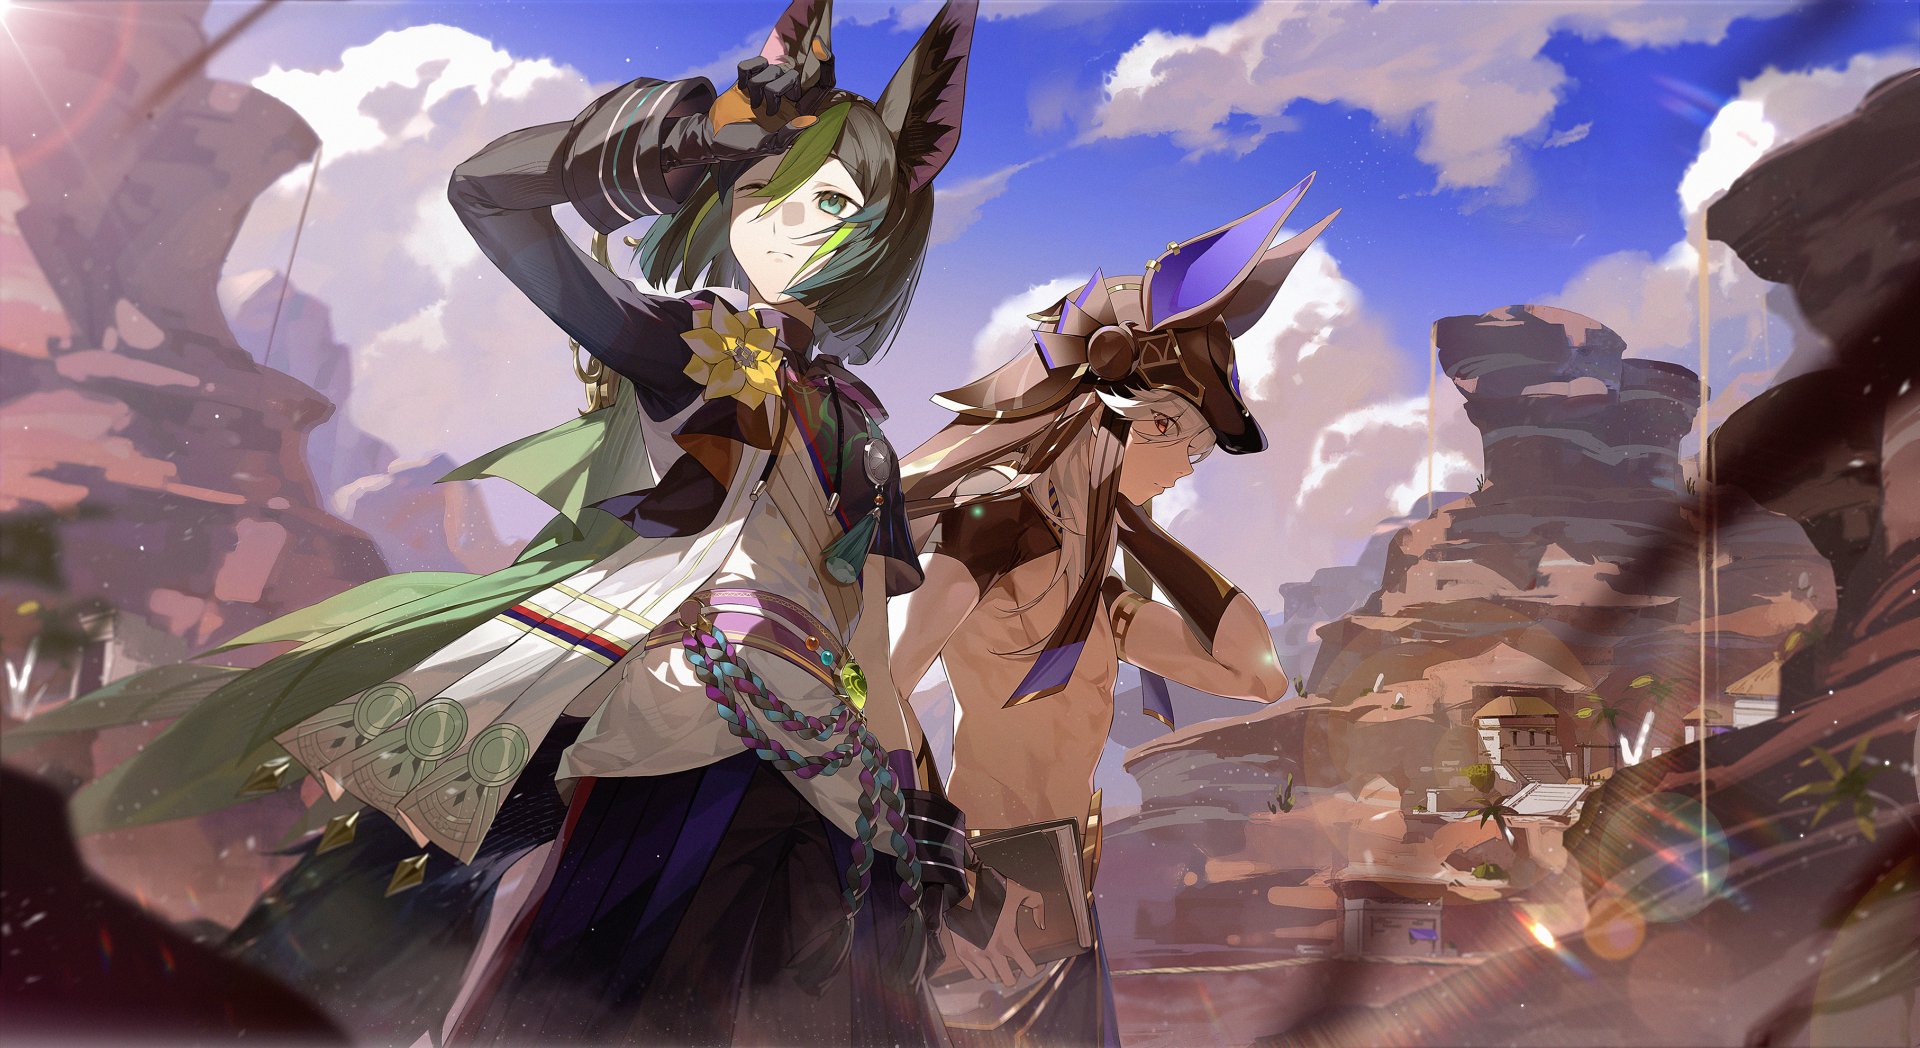 New Official Genshin Wallpapers Feature Baizhu and Sumeru Characters